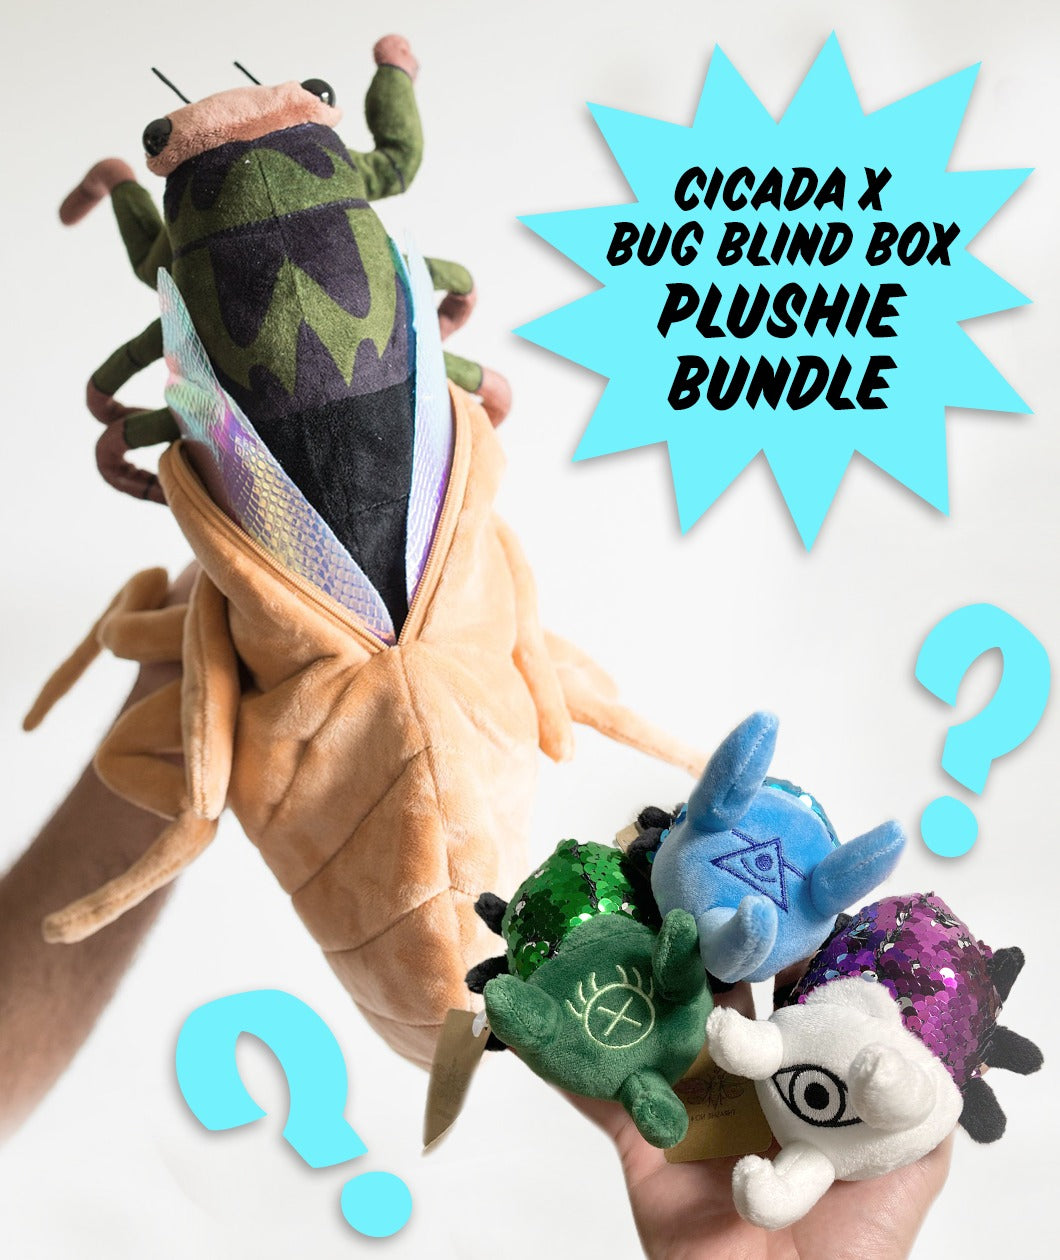 Cicada plushie and three small bug plushies in green, blue and purple with sequins